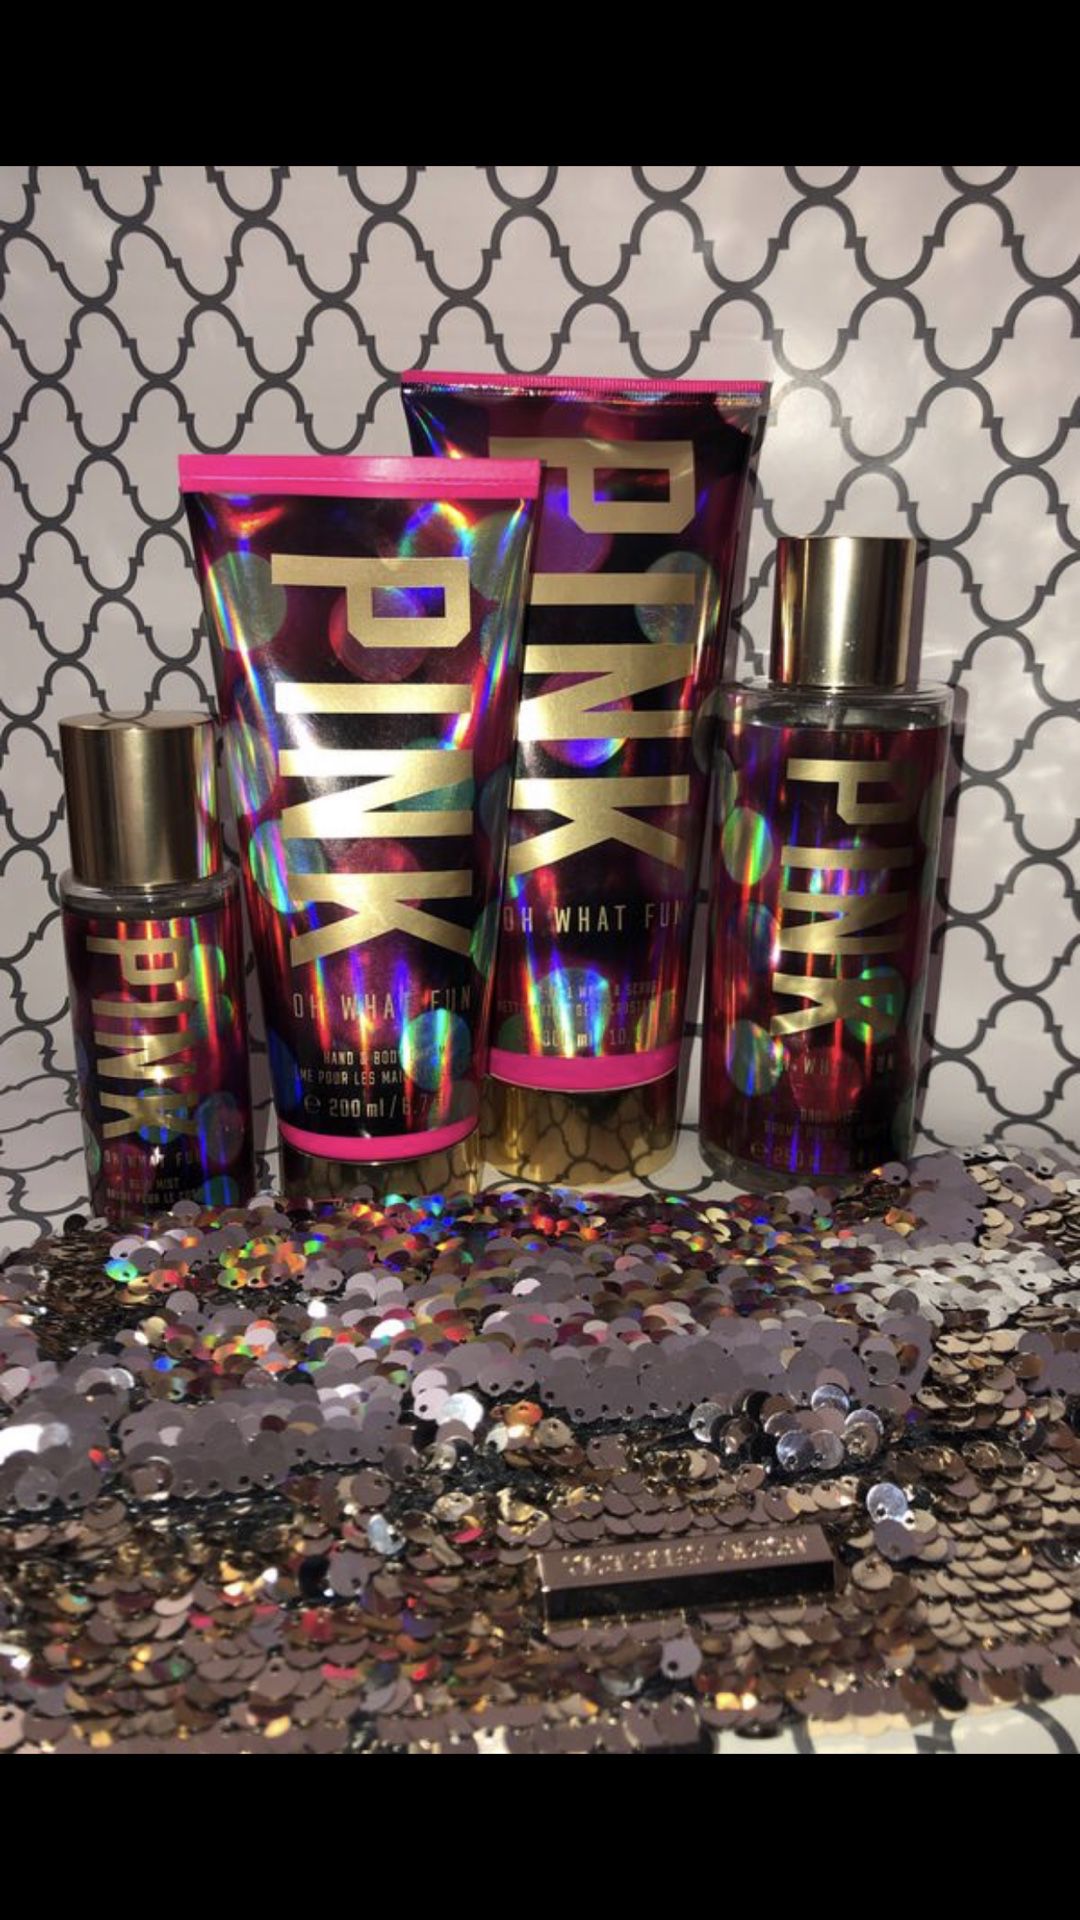 Victoria’s Secret ‘OH WHAT FUN’ Limited Edition 5pc set NEW